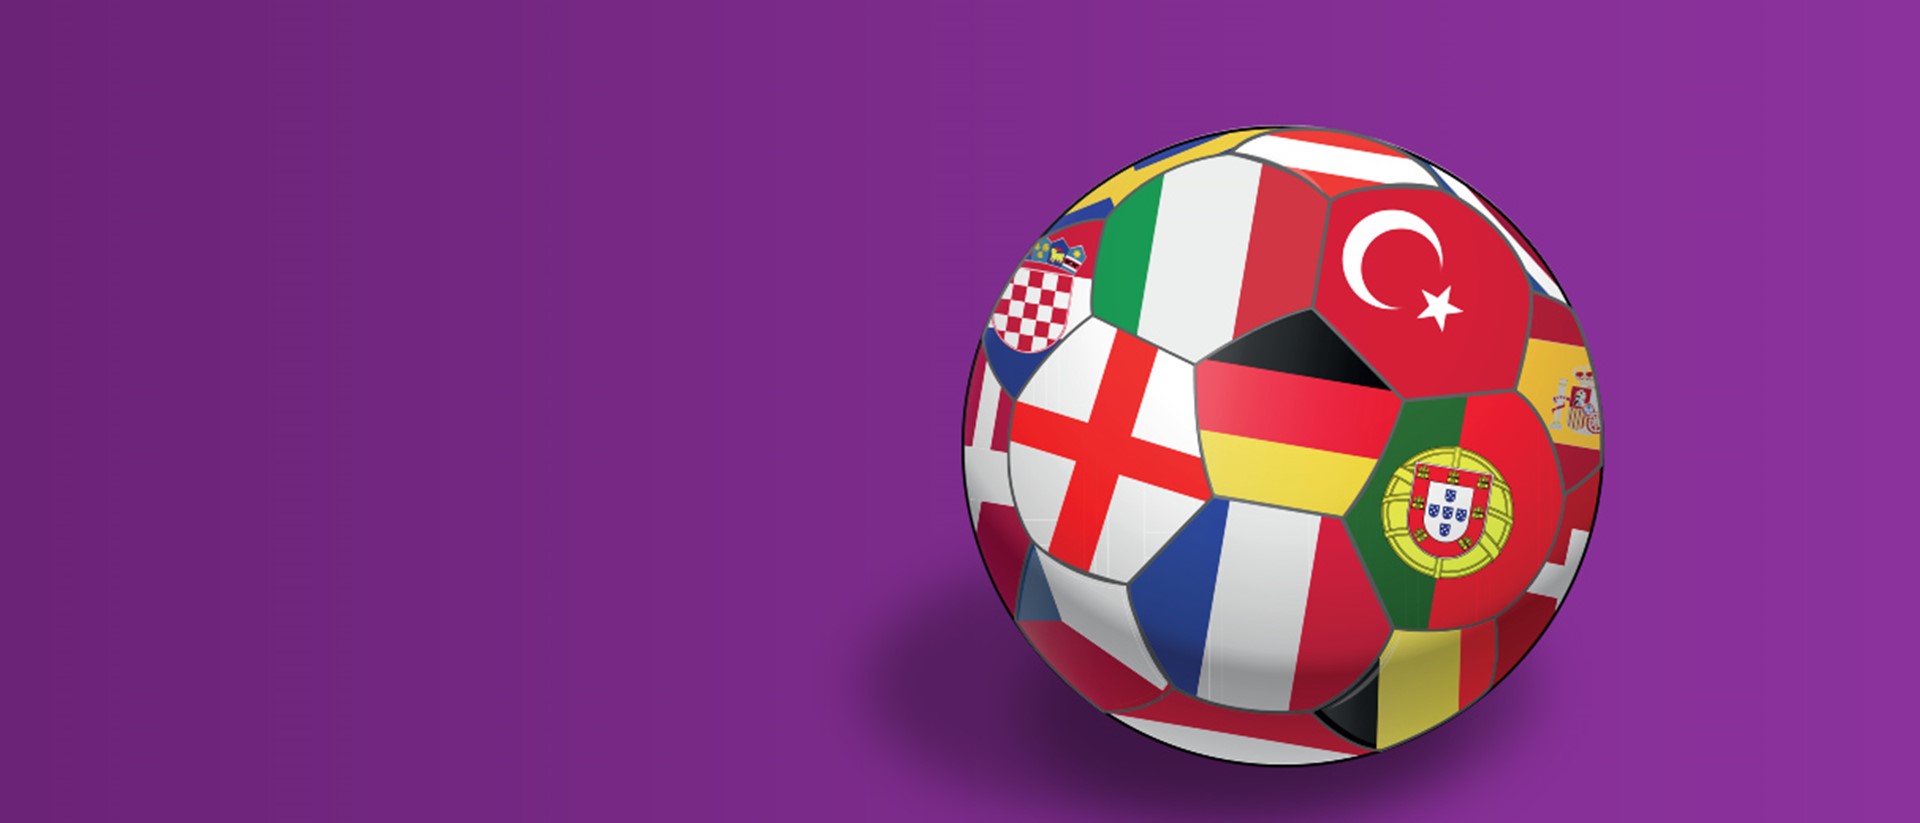 Image of a football with flags of European countries on a purple background